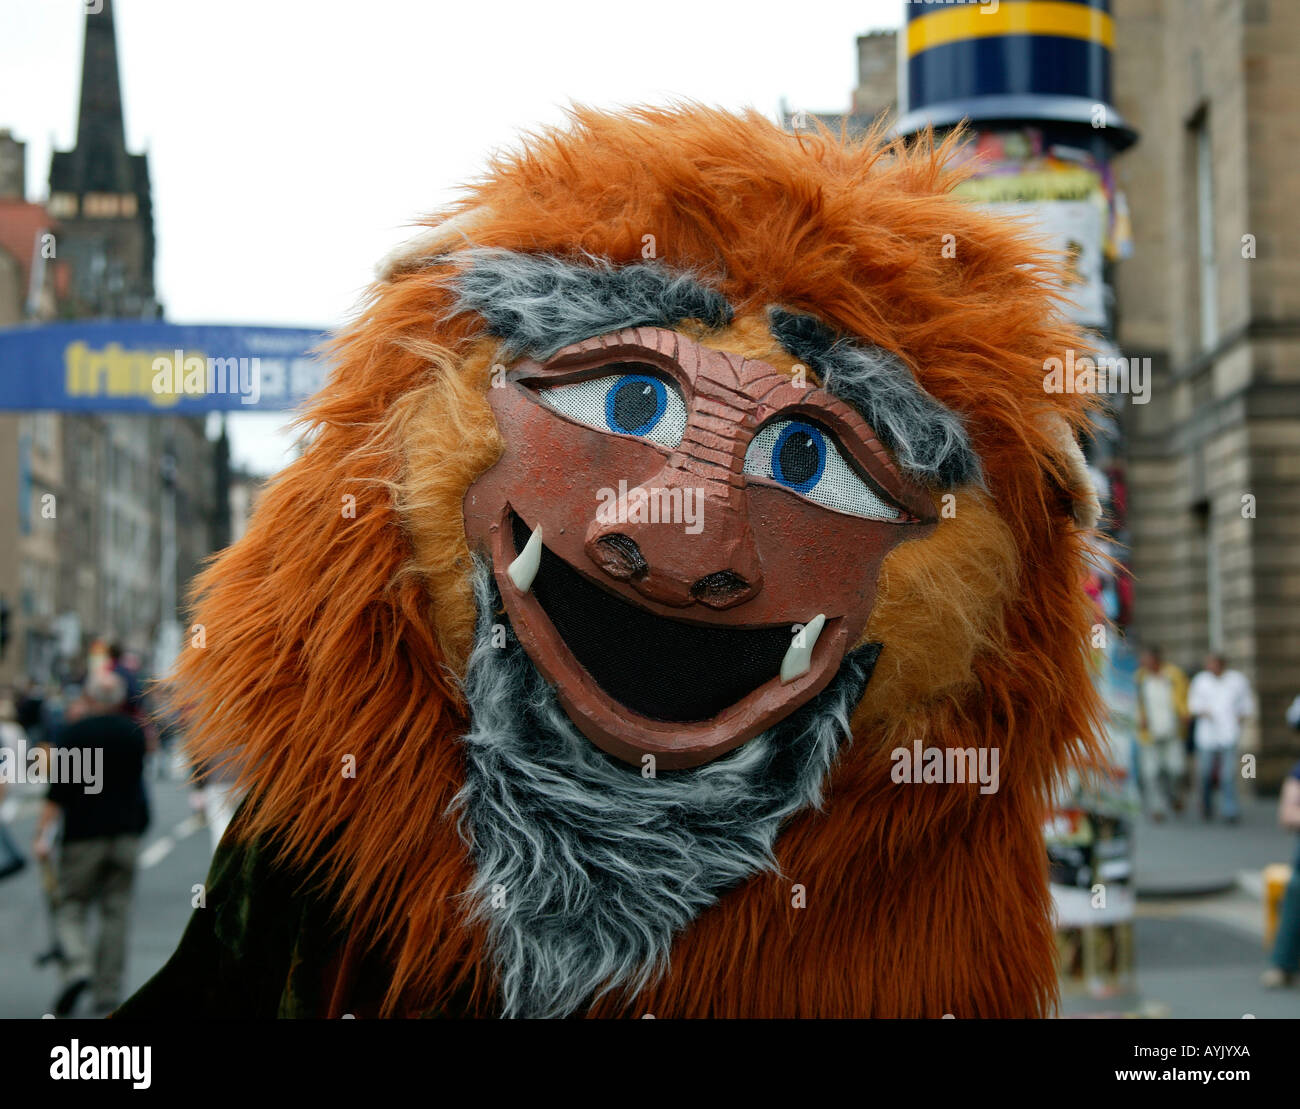 Person dressed in Lion Head outfit to promote show, Edinburgh Fringe Festival, Scotland Stock Photo